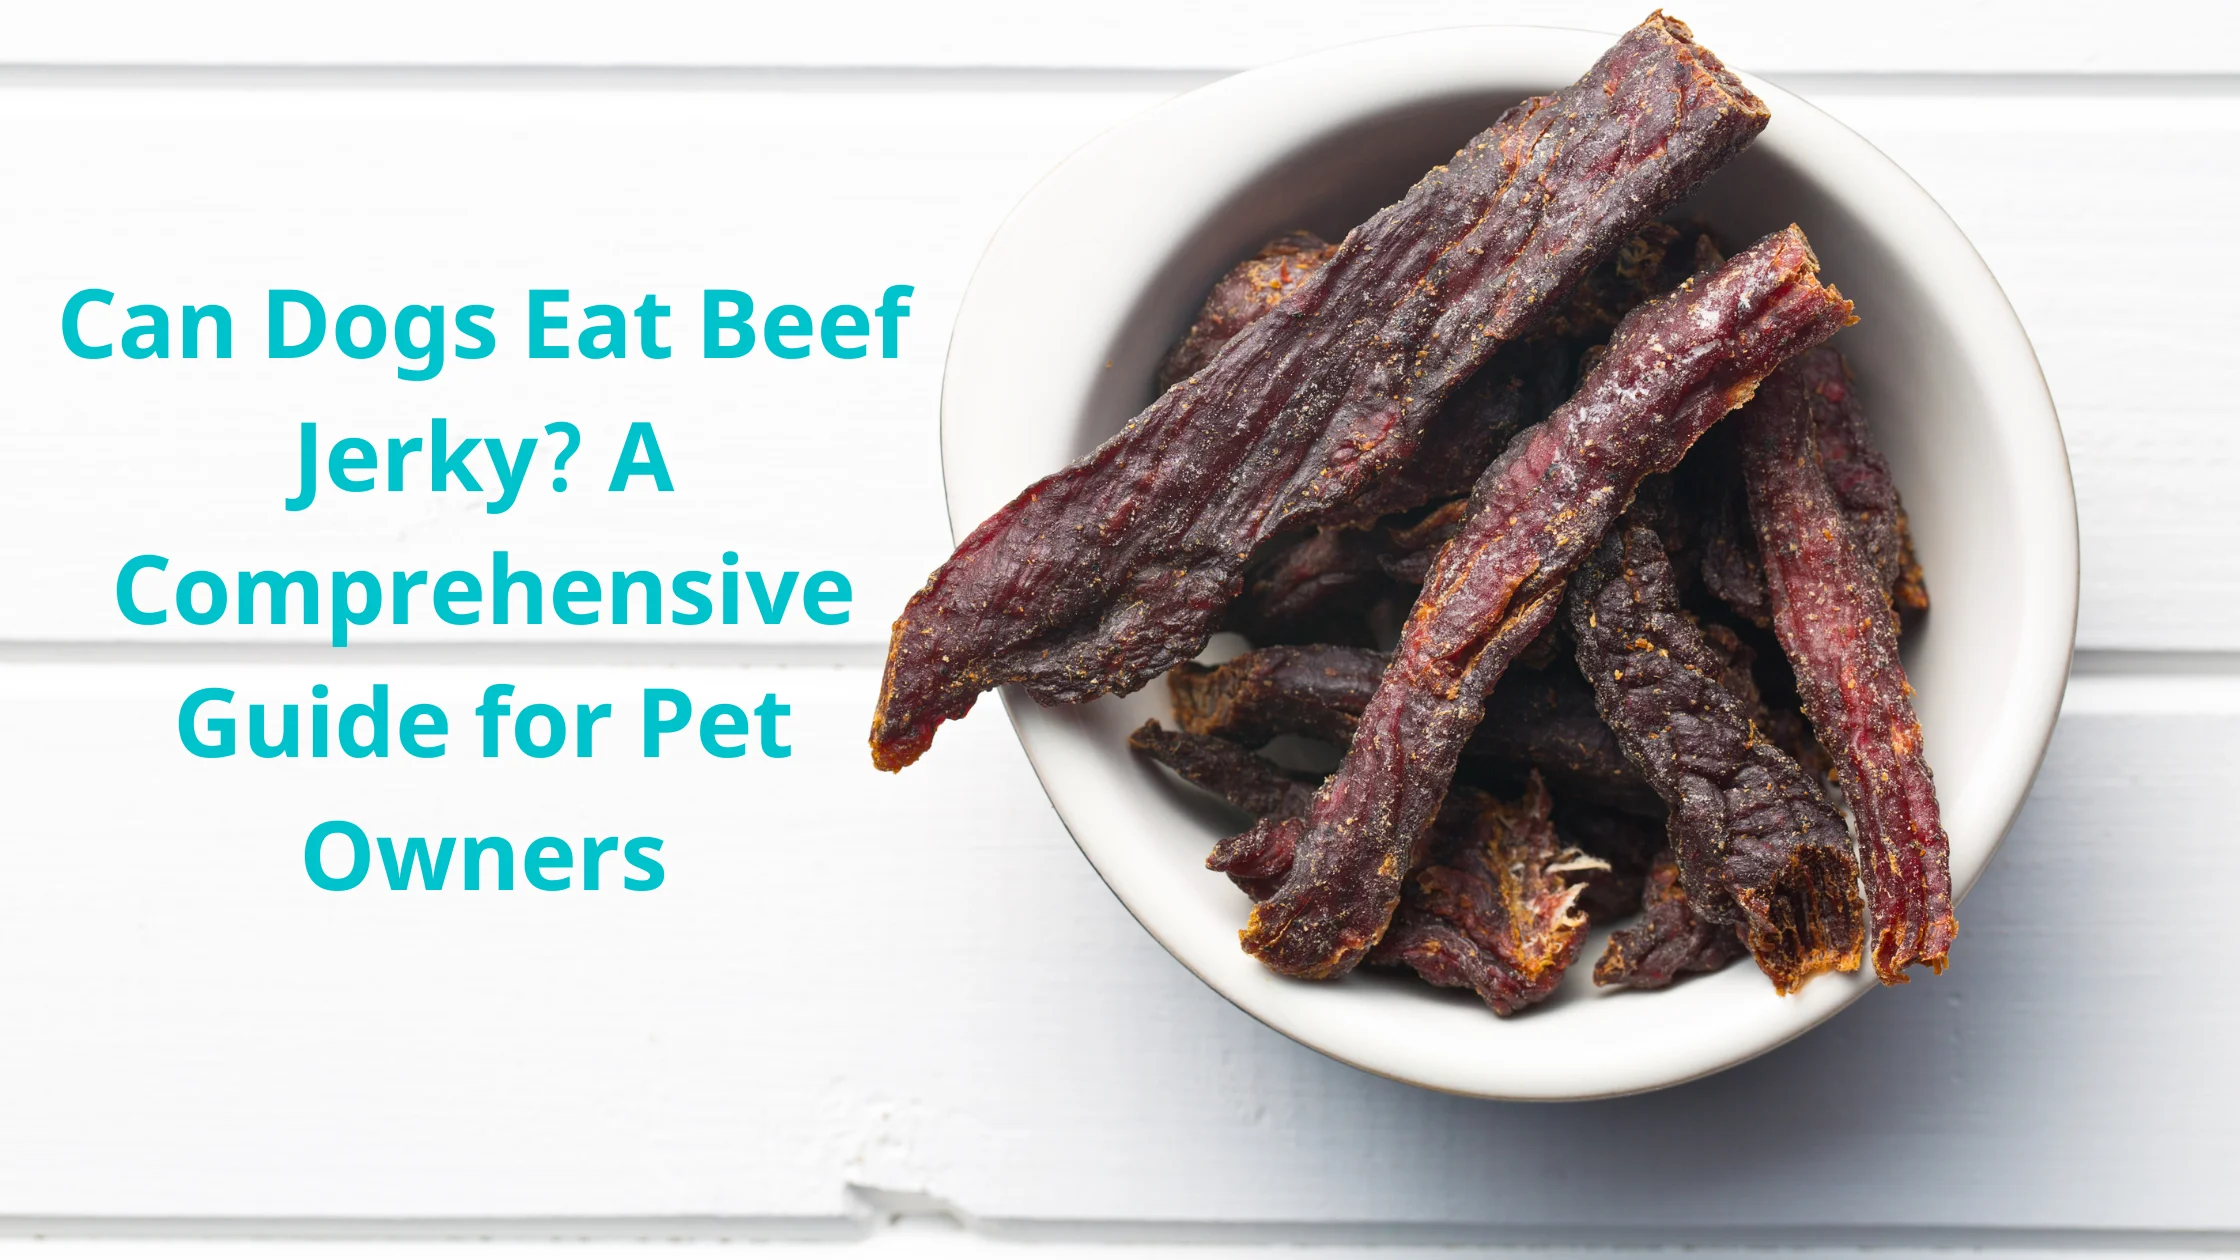 Can Dogs Eat Beef Jerky? A Comprehensive Guide for Pet Owners